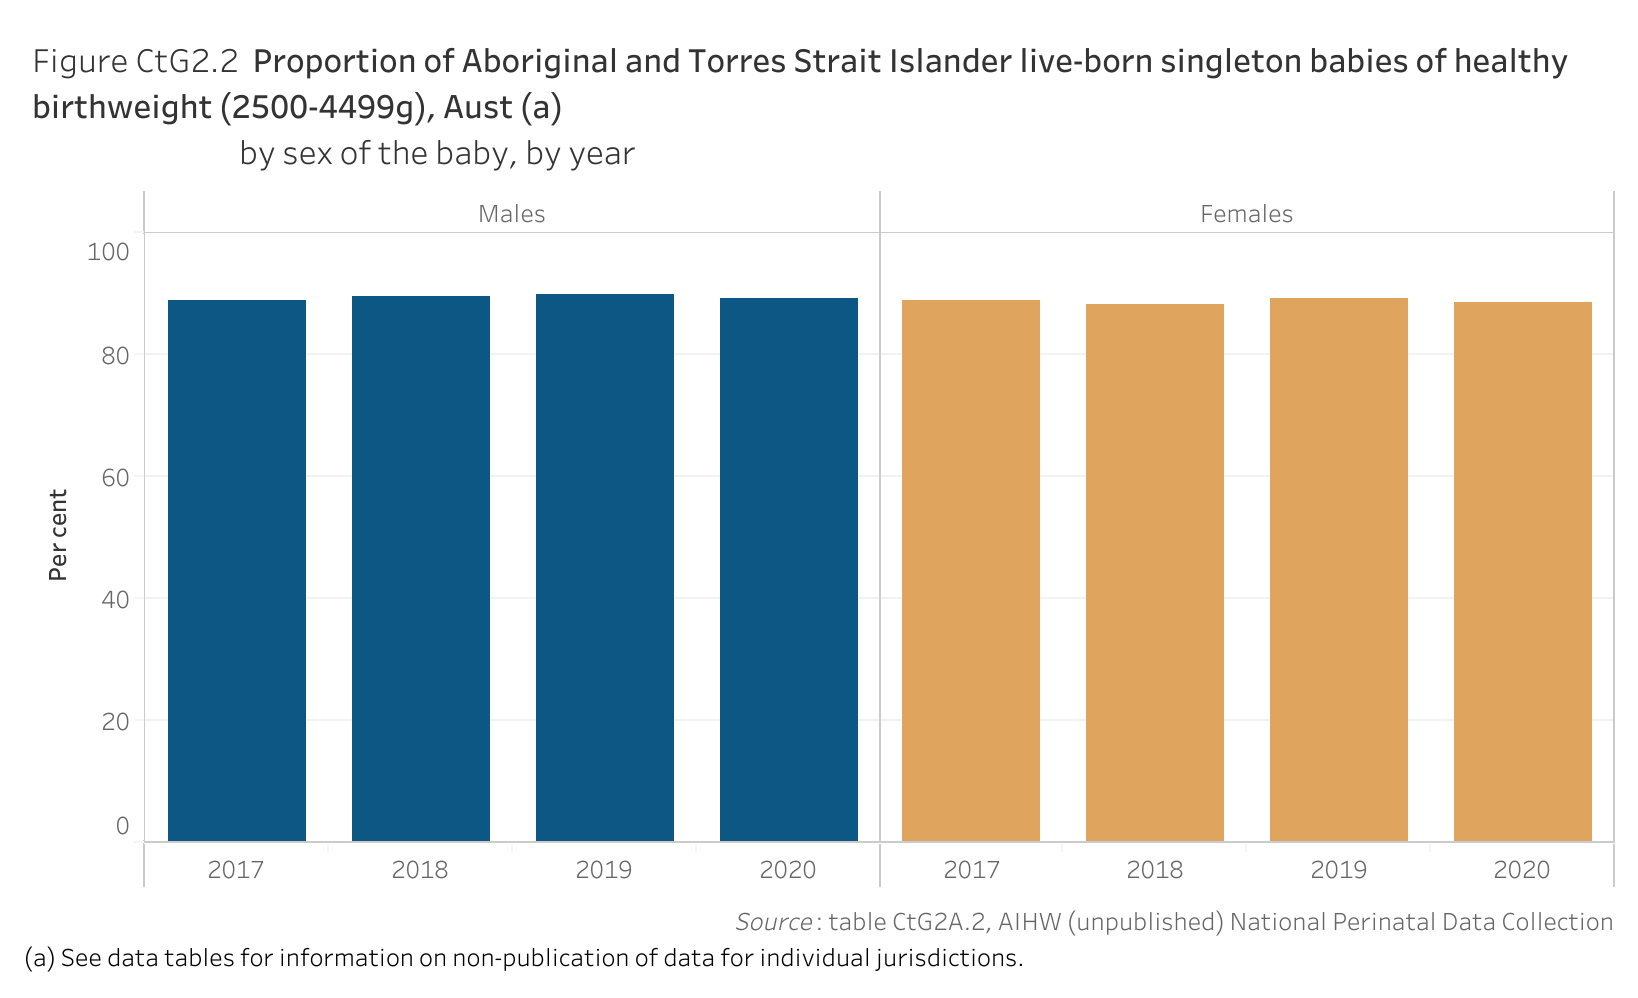 Figure CtG2.2 shows the proportion of Aboriginal and Torres Strait Islander live-born singleton babies of healthy birthweight (2500-4499g), Australia, by sex of the baby, by year. More details can be found within the text near this image.